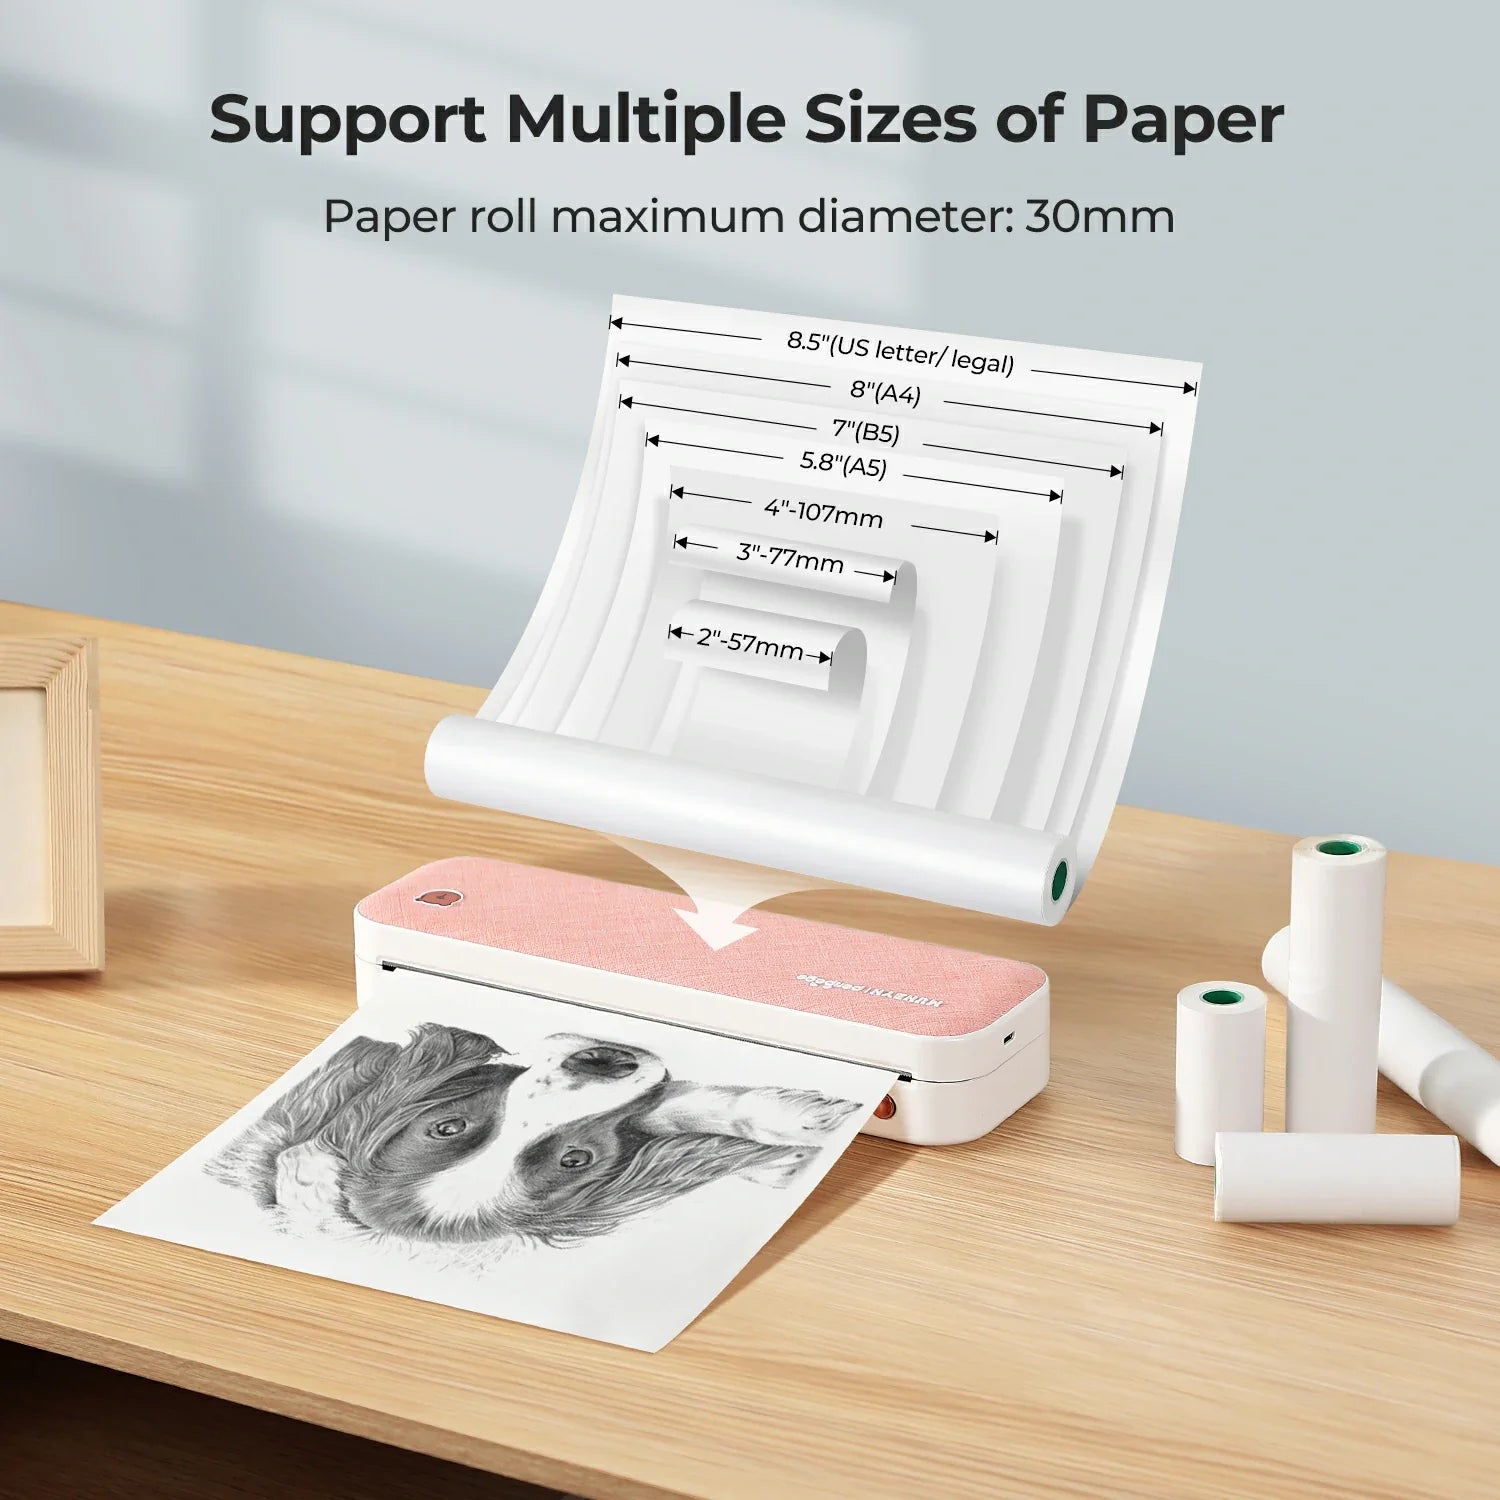 MUNBYN A4 Paper Portable Thermal Printer ITP01 supports multiple sizes of paper, from 57mm to 216mm.